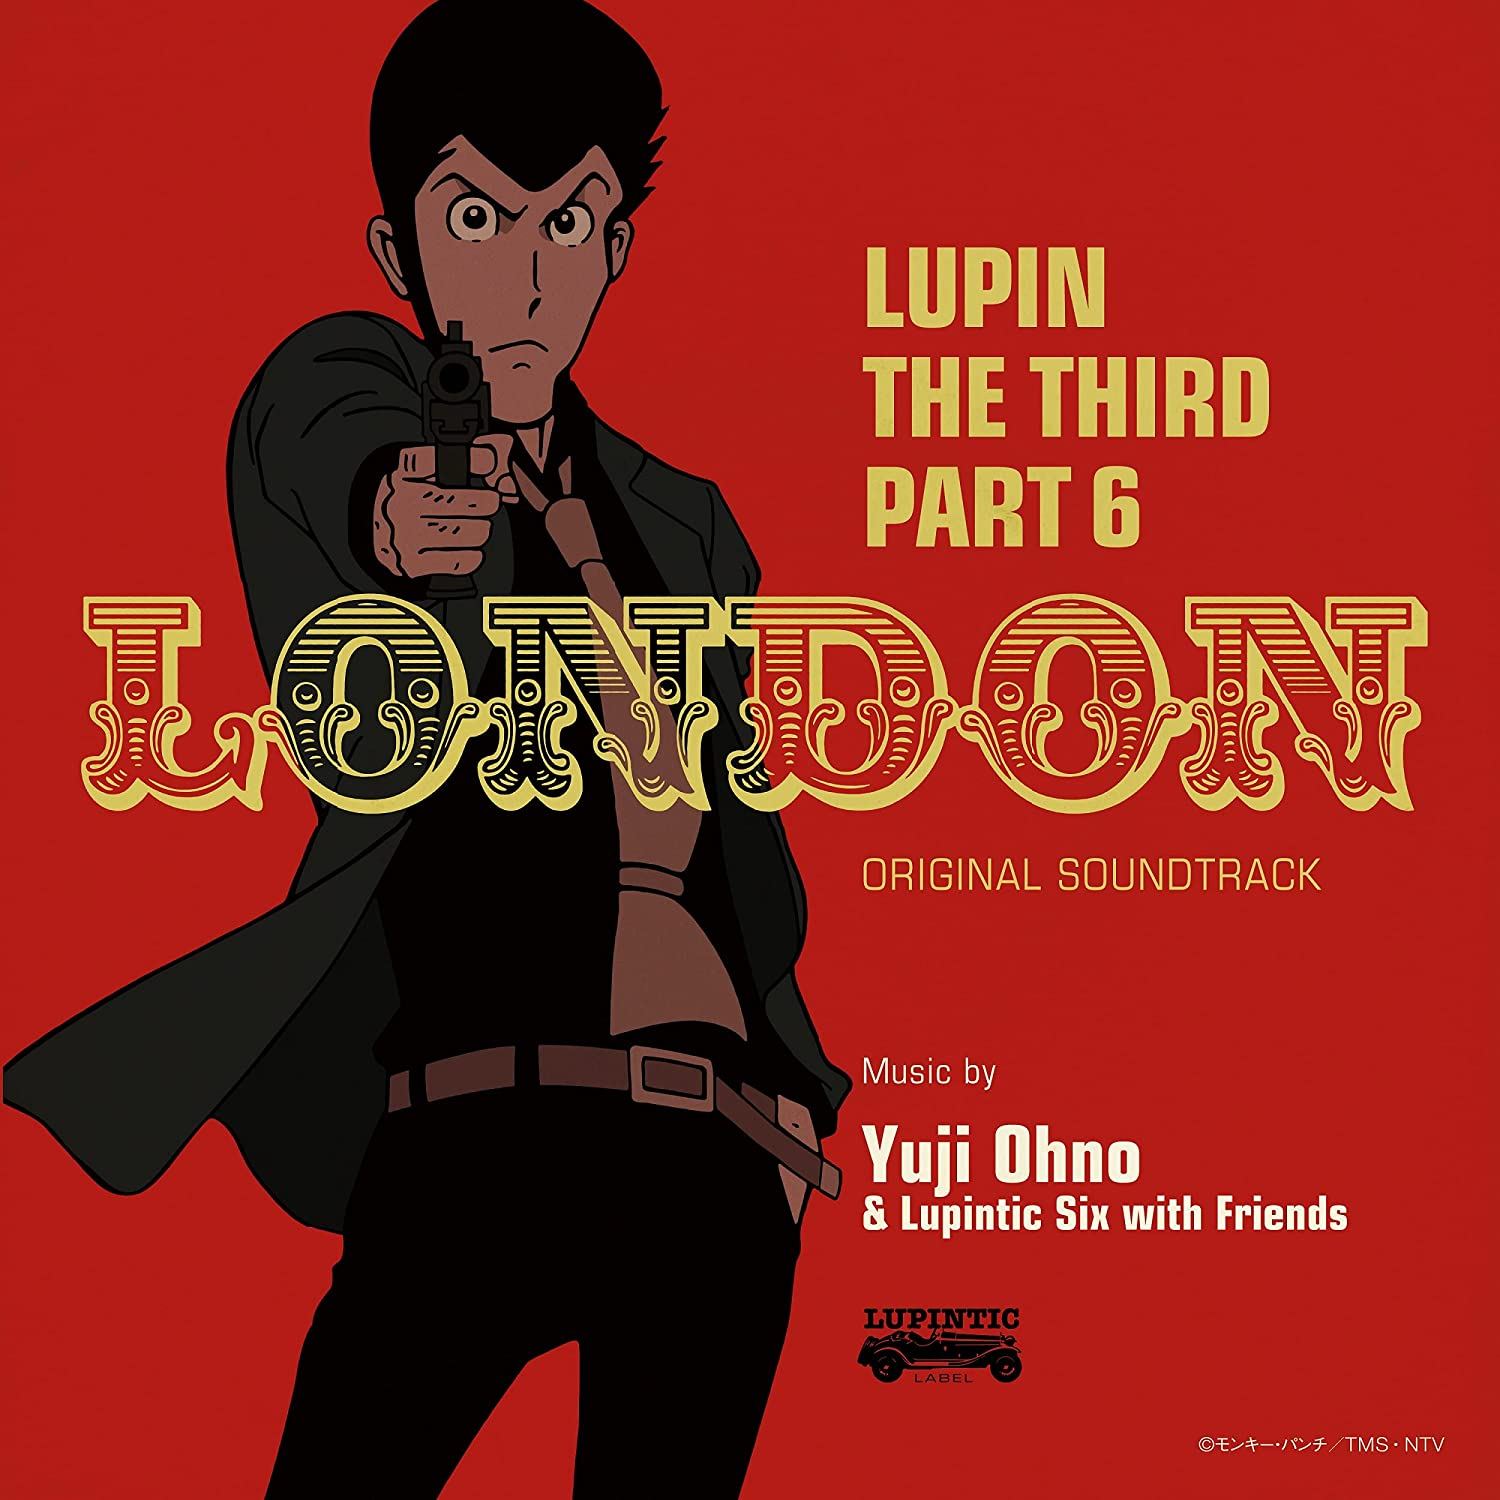 Lupin The Third Part 6 Original Soundtrack 1 London [Limited Pressing  Edition] (Vinyl)